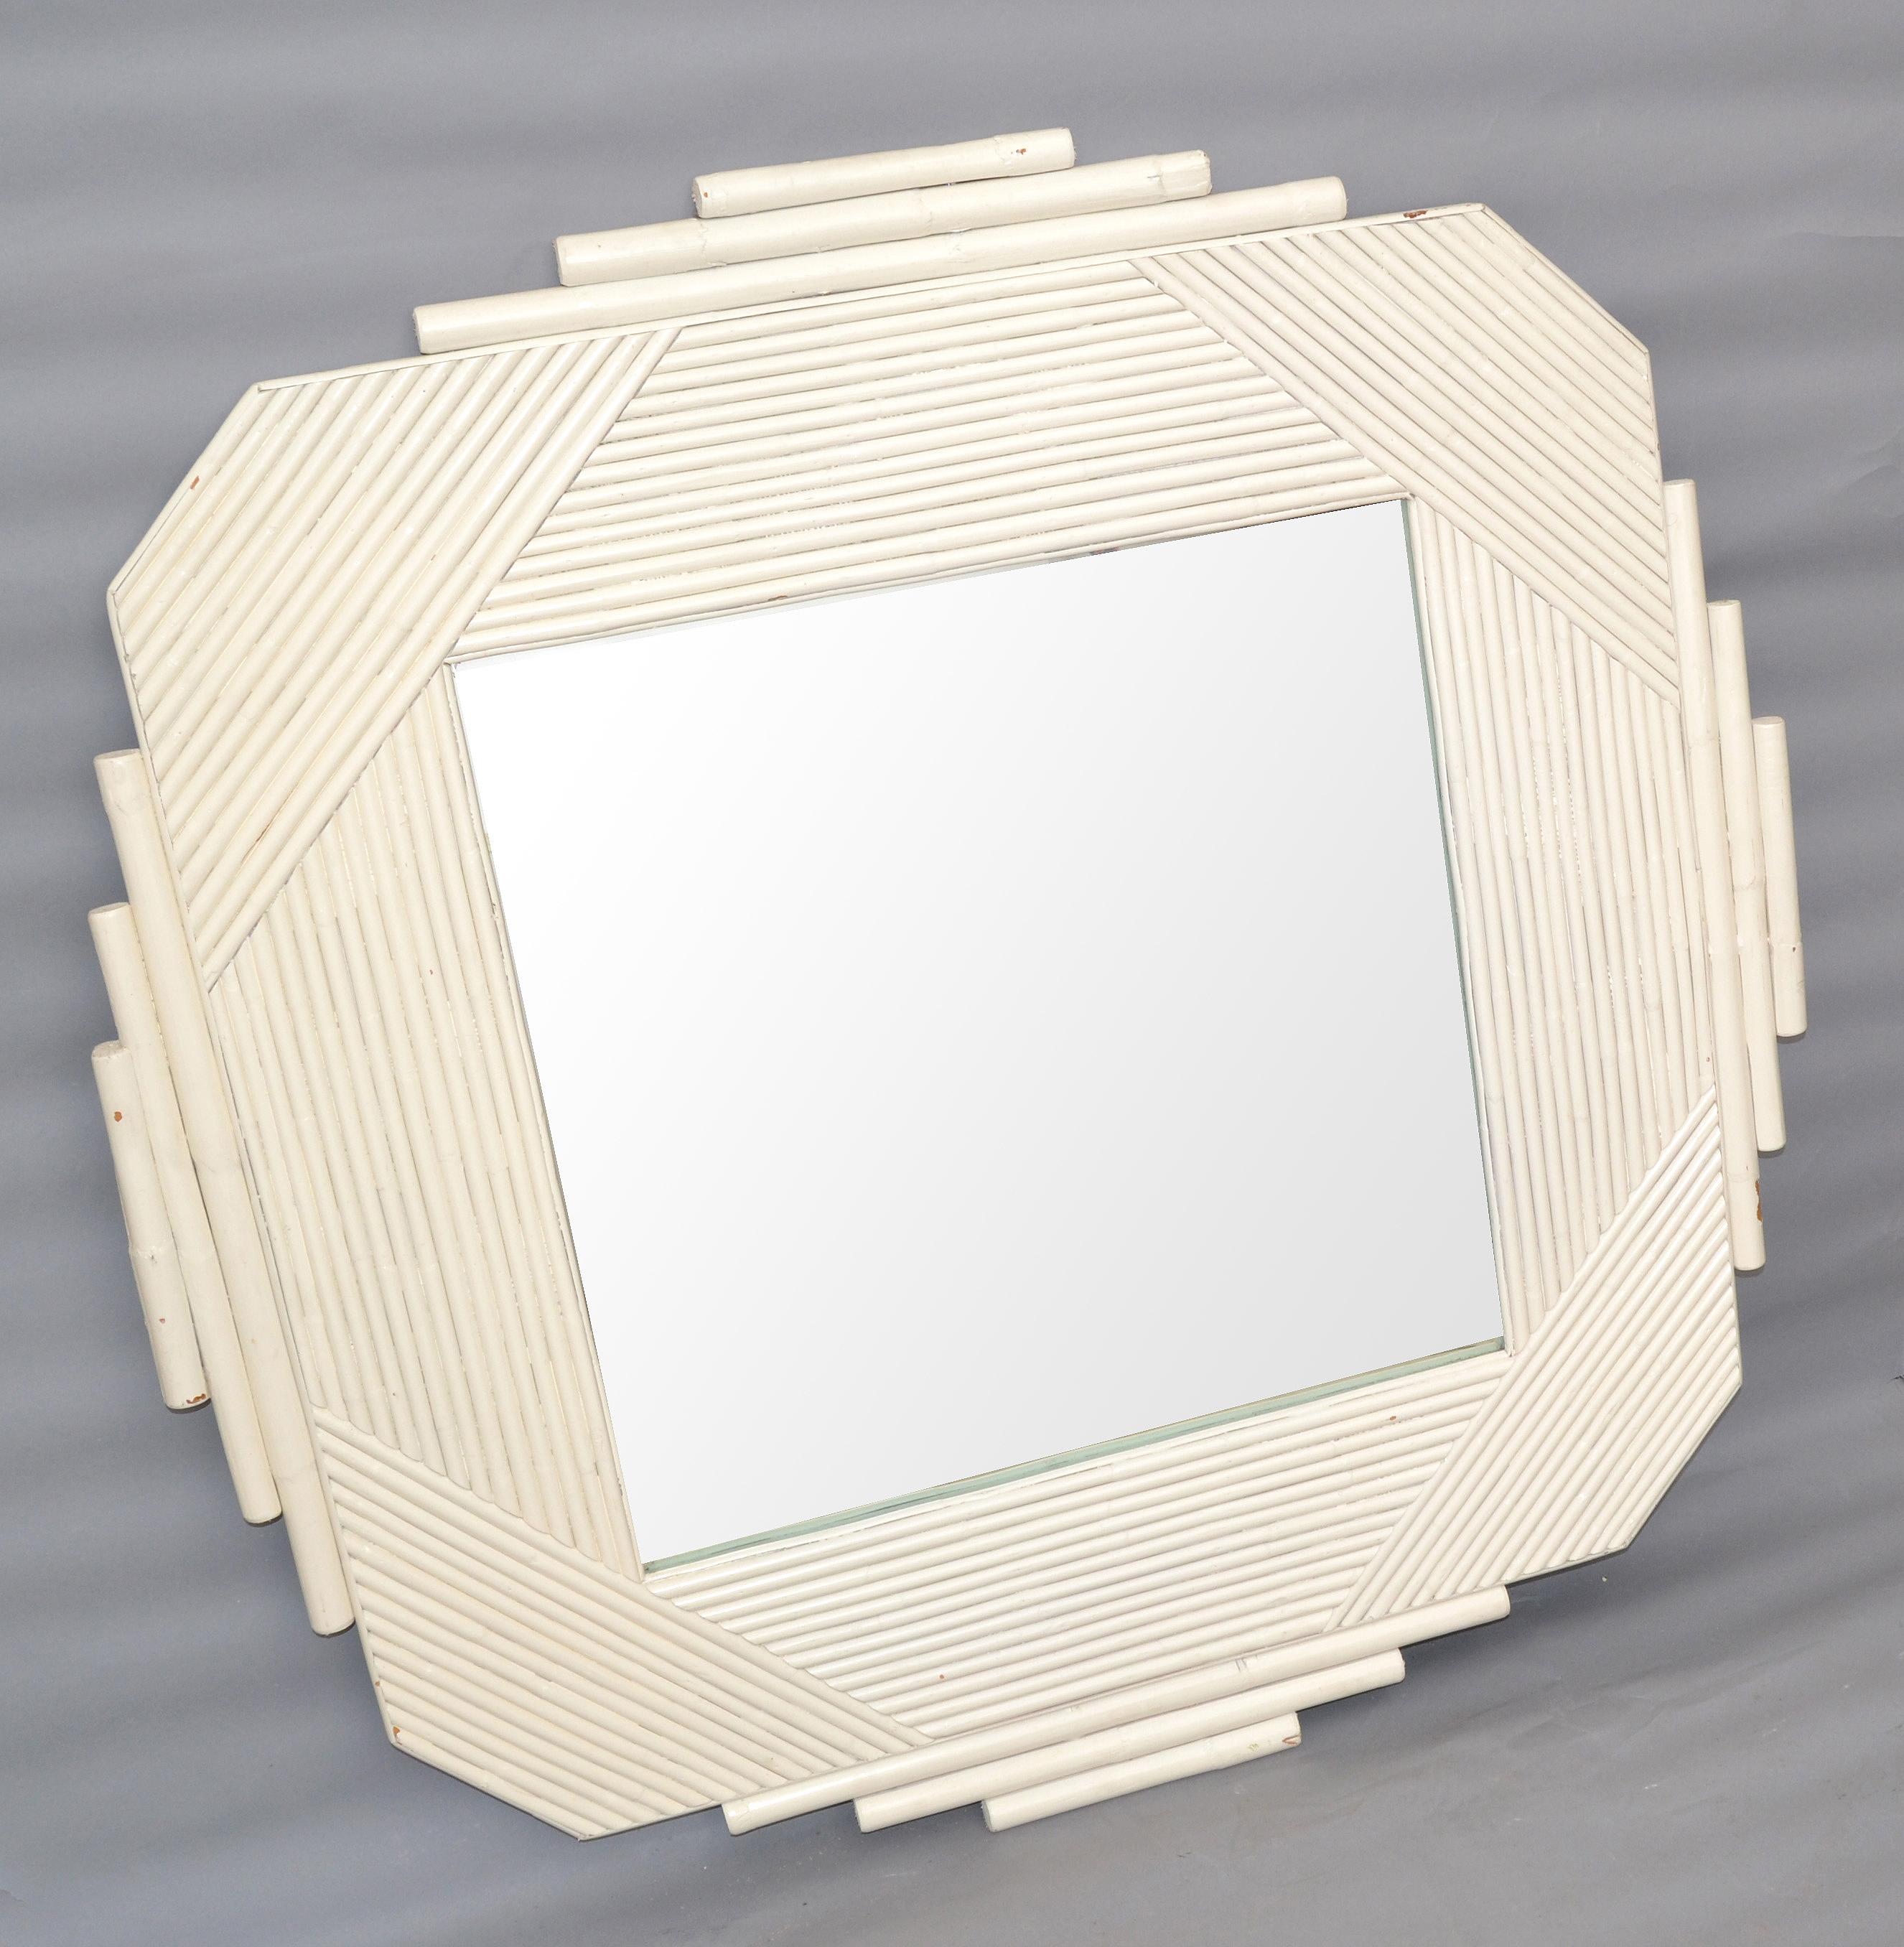 Coastal Bohemian White Bamboo & Wood Geometric Wall Mirror Mid-Century Modern   In Good Condition For Sale In Miami, FL